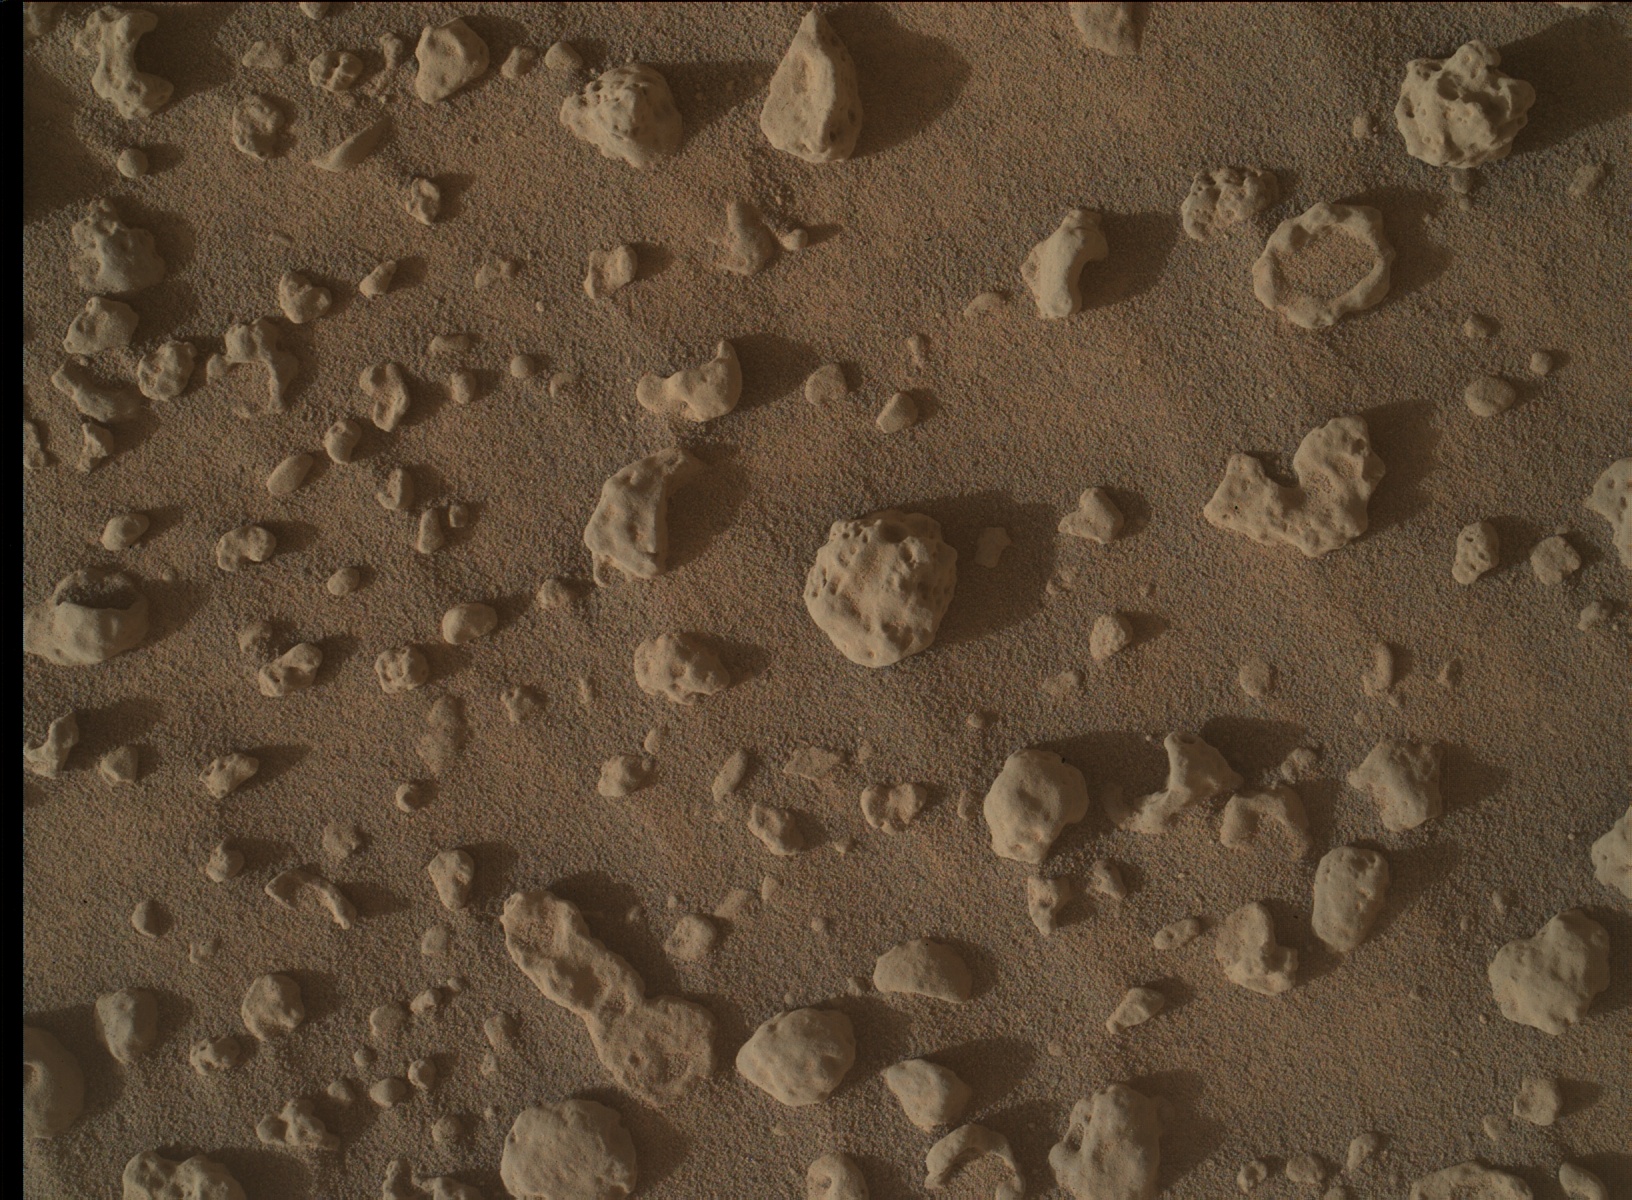 Nasa's Mars rover Curiosity acquired this image using its Mars Hand Lens Imager (MAHLI) on Sol 3746